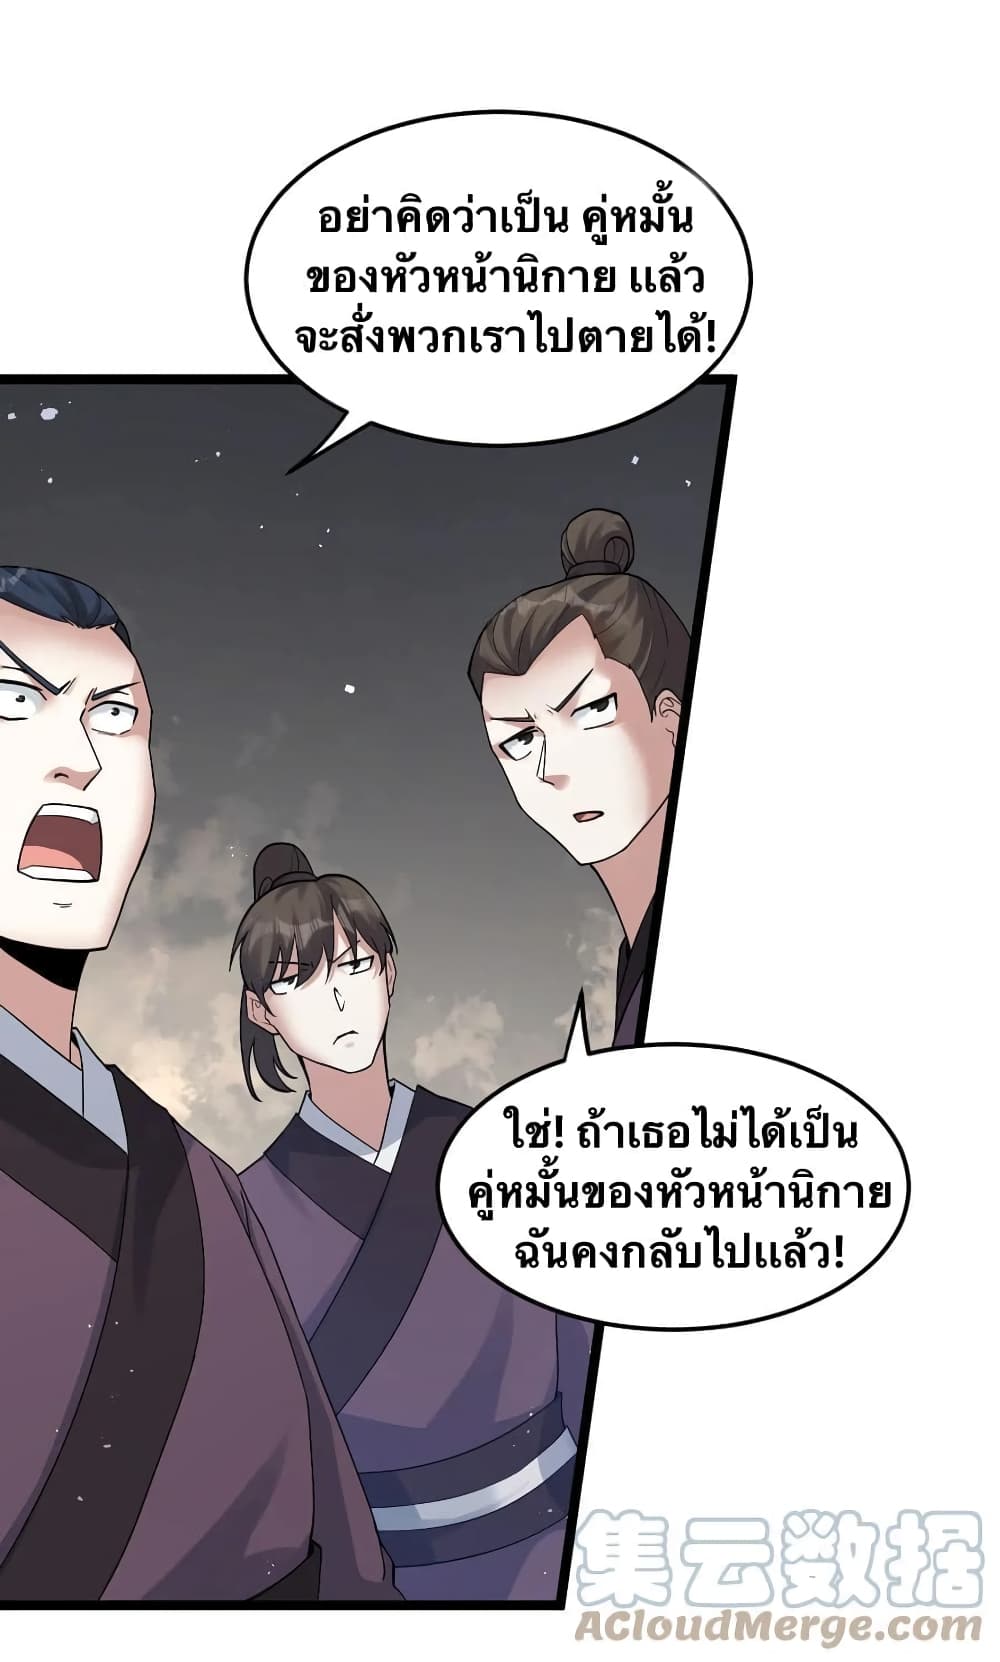 Godsian Masian from Another World 86 แปลไทย